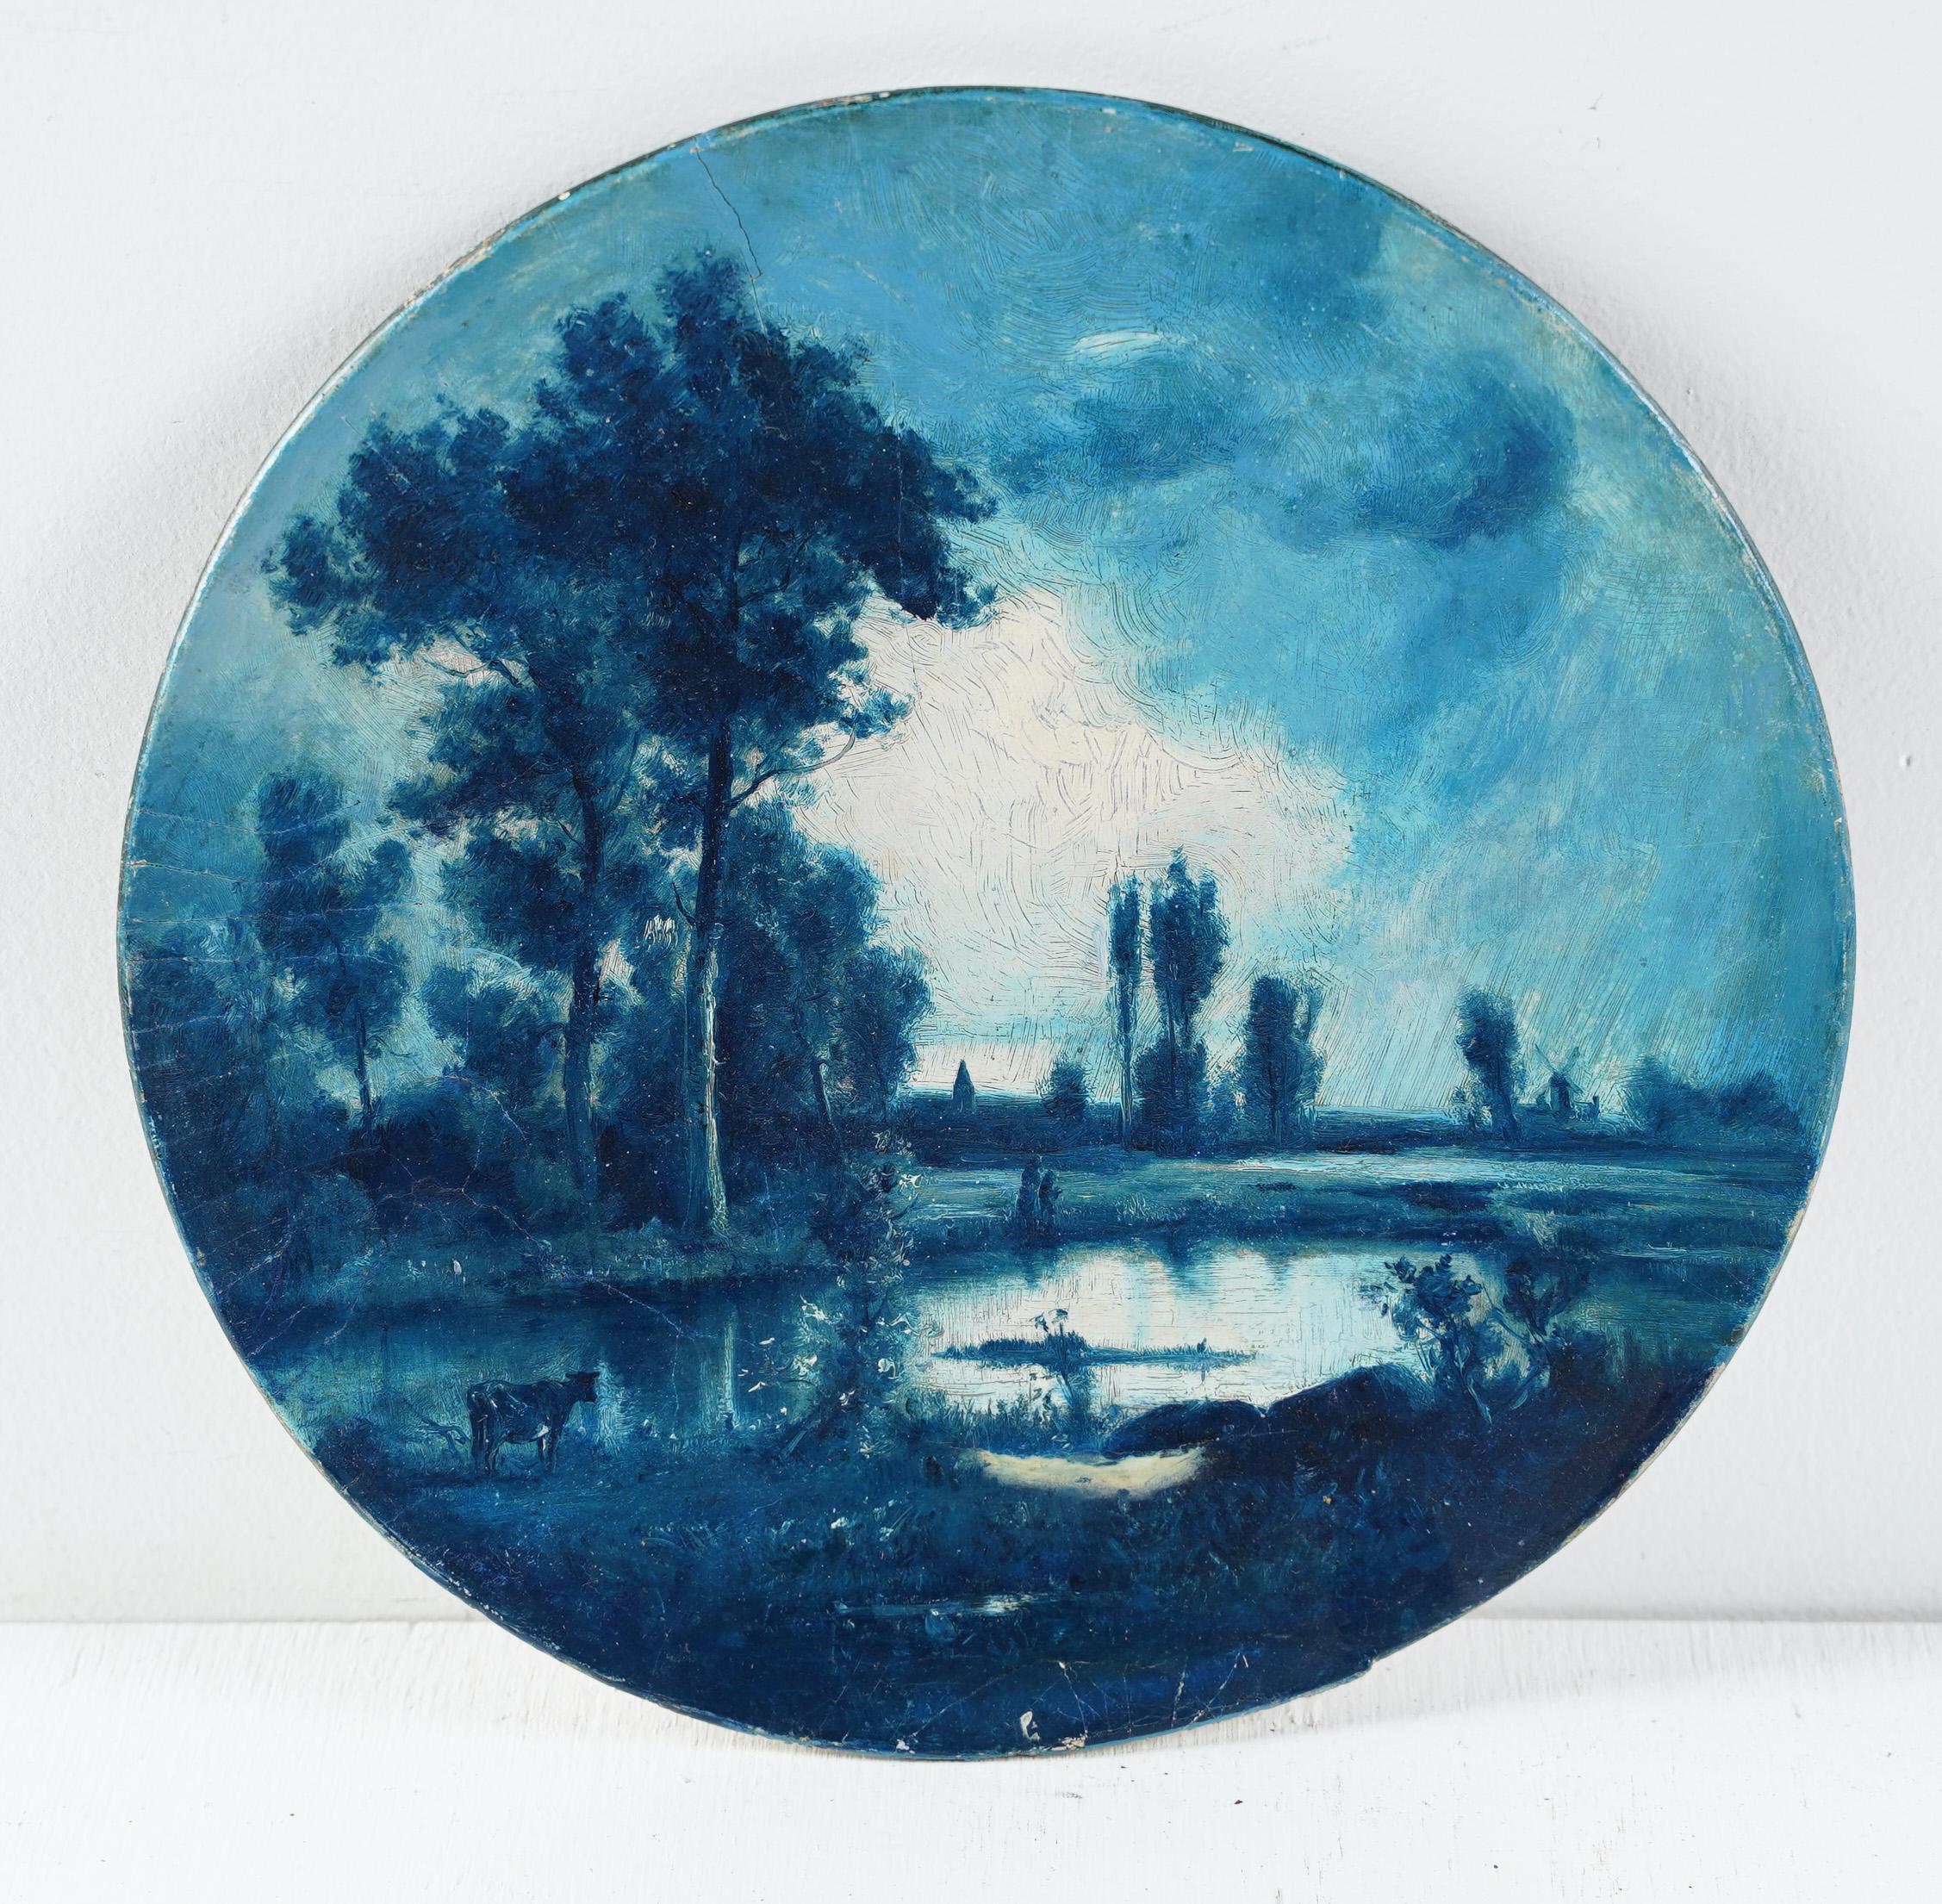 Unsigned mystery 19th century American landscape painting. Oil on concave oval board. Measuring  10 x 10. 